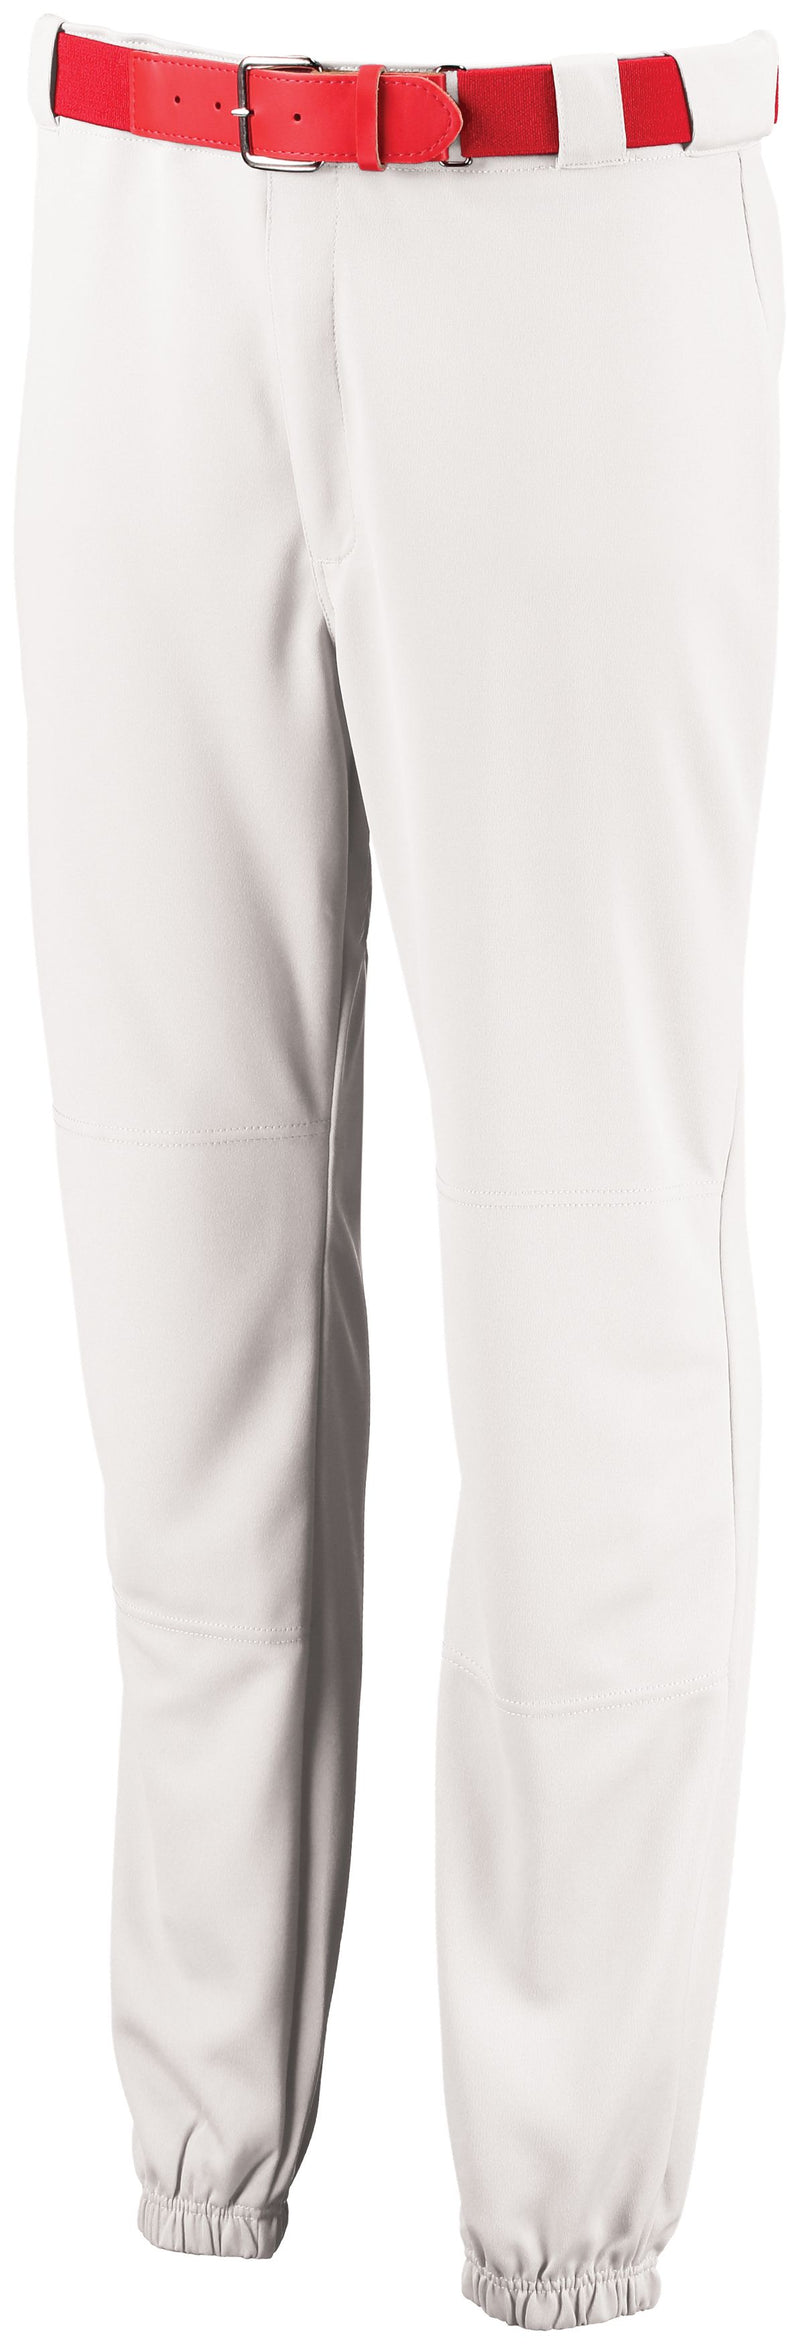 Russell Adult Baseball Game Pant